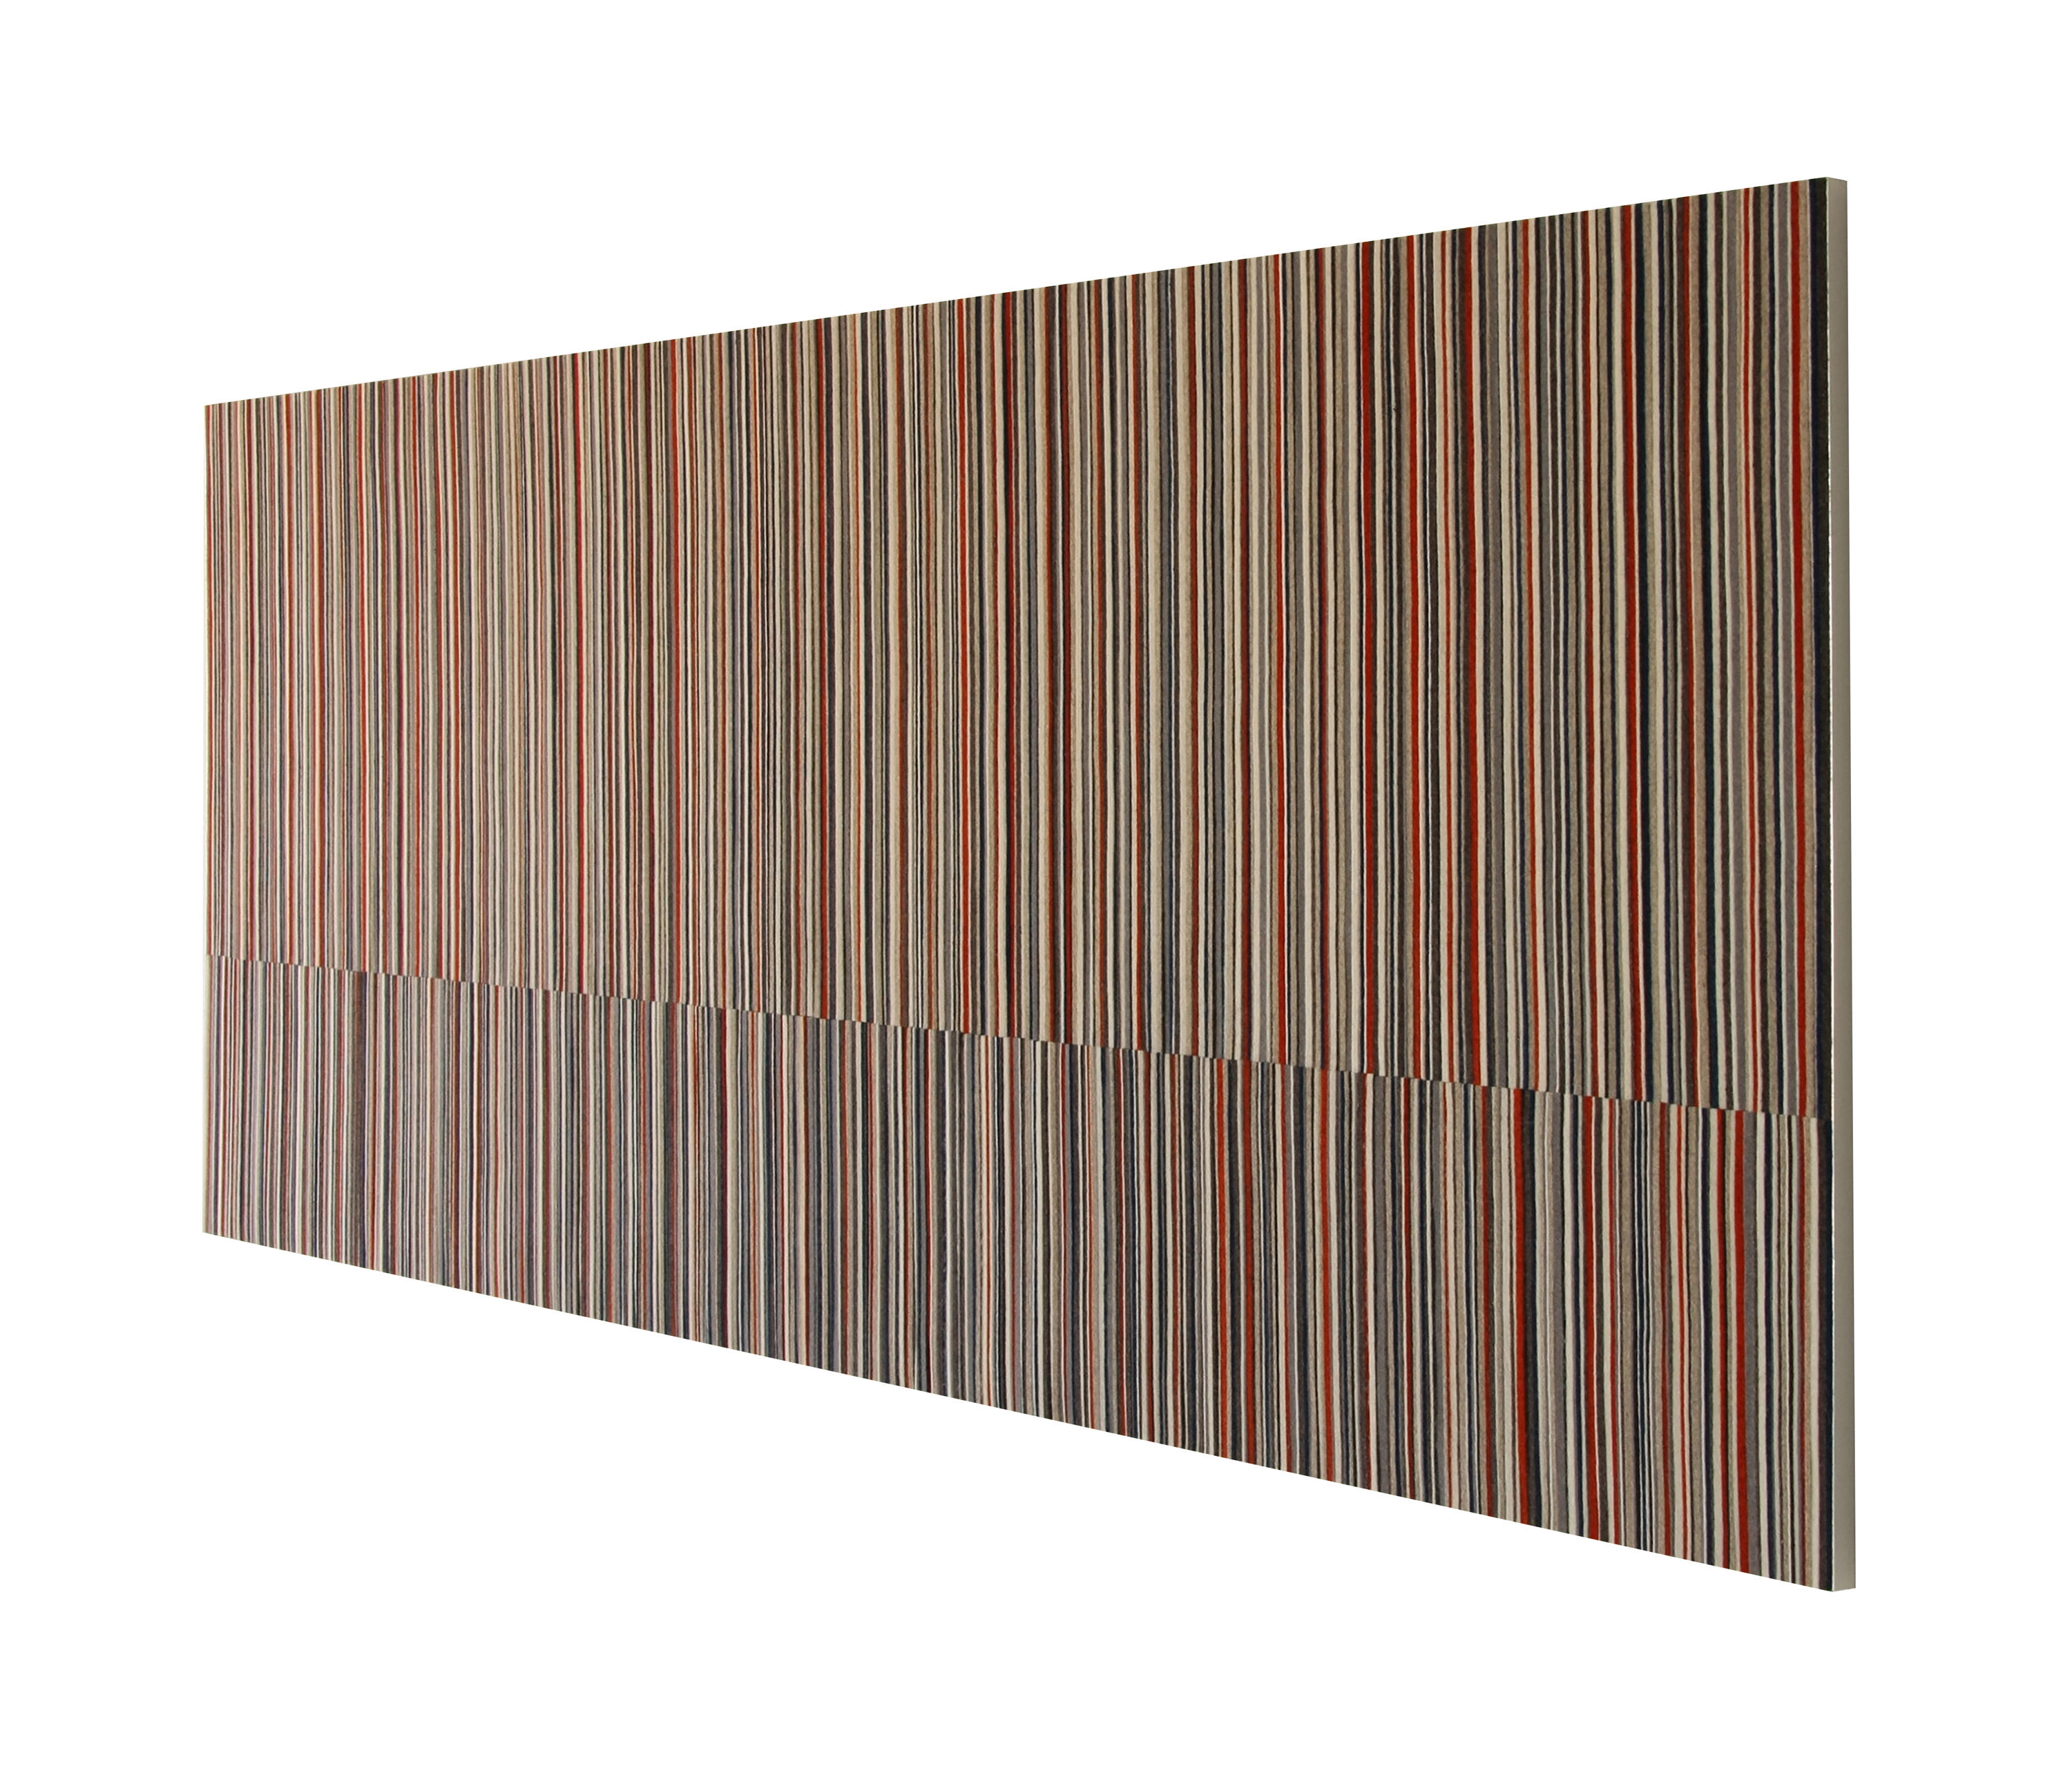 WALL PANEL 071 - Sound absorbing wall systems from Submaterial | Architonic